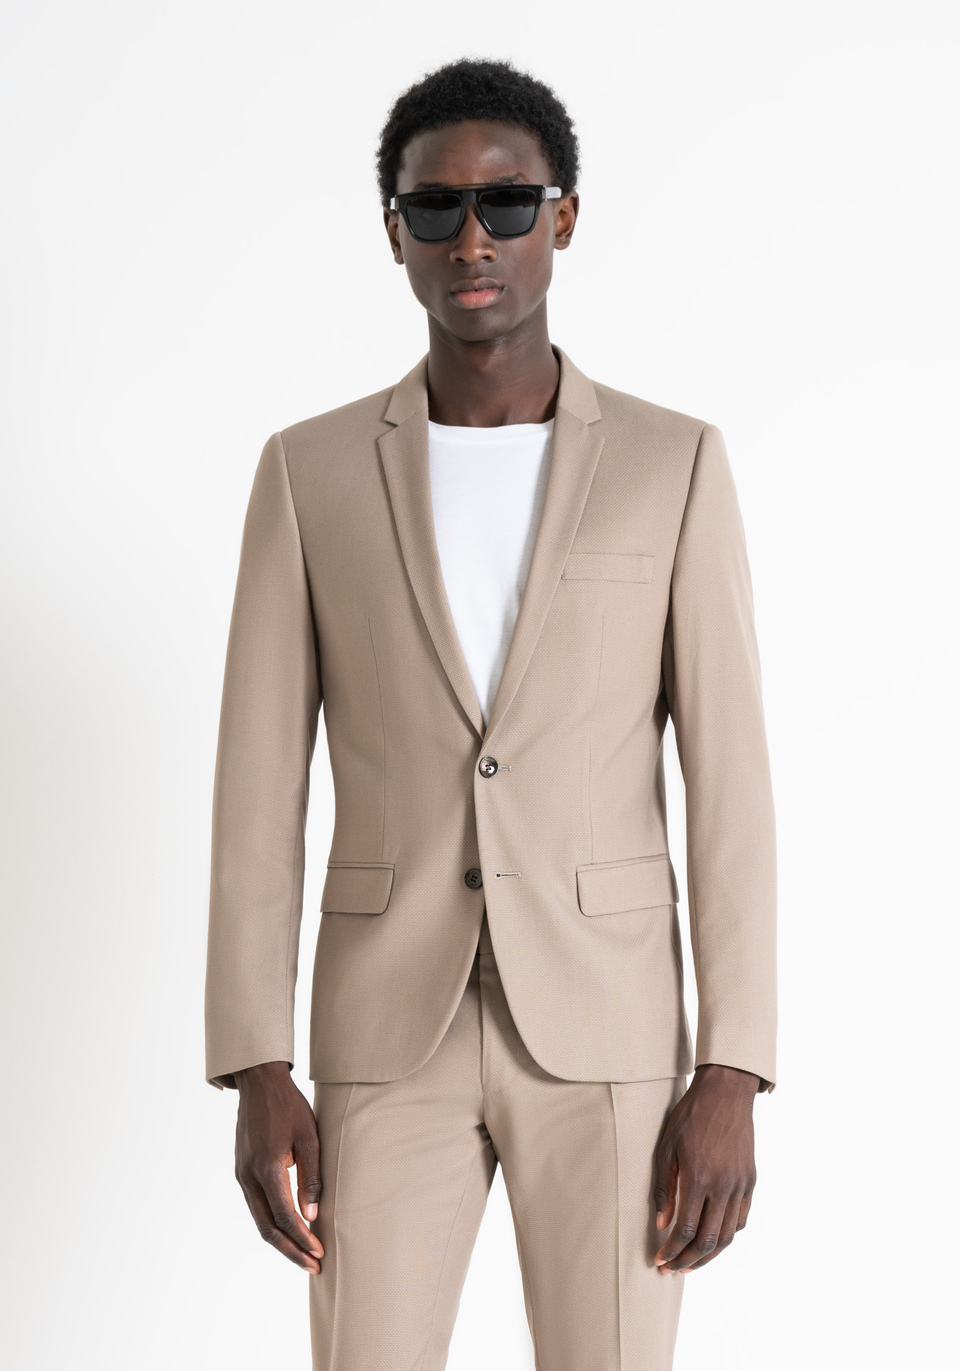 "BONNIE" SLIM FIT JACKET IN ELASTIC VISCOSE BLEND FABRIC WITH MICRO PATTERN - Antony Morato Online Shop